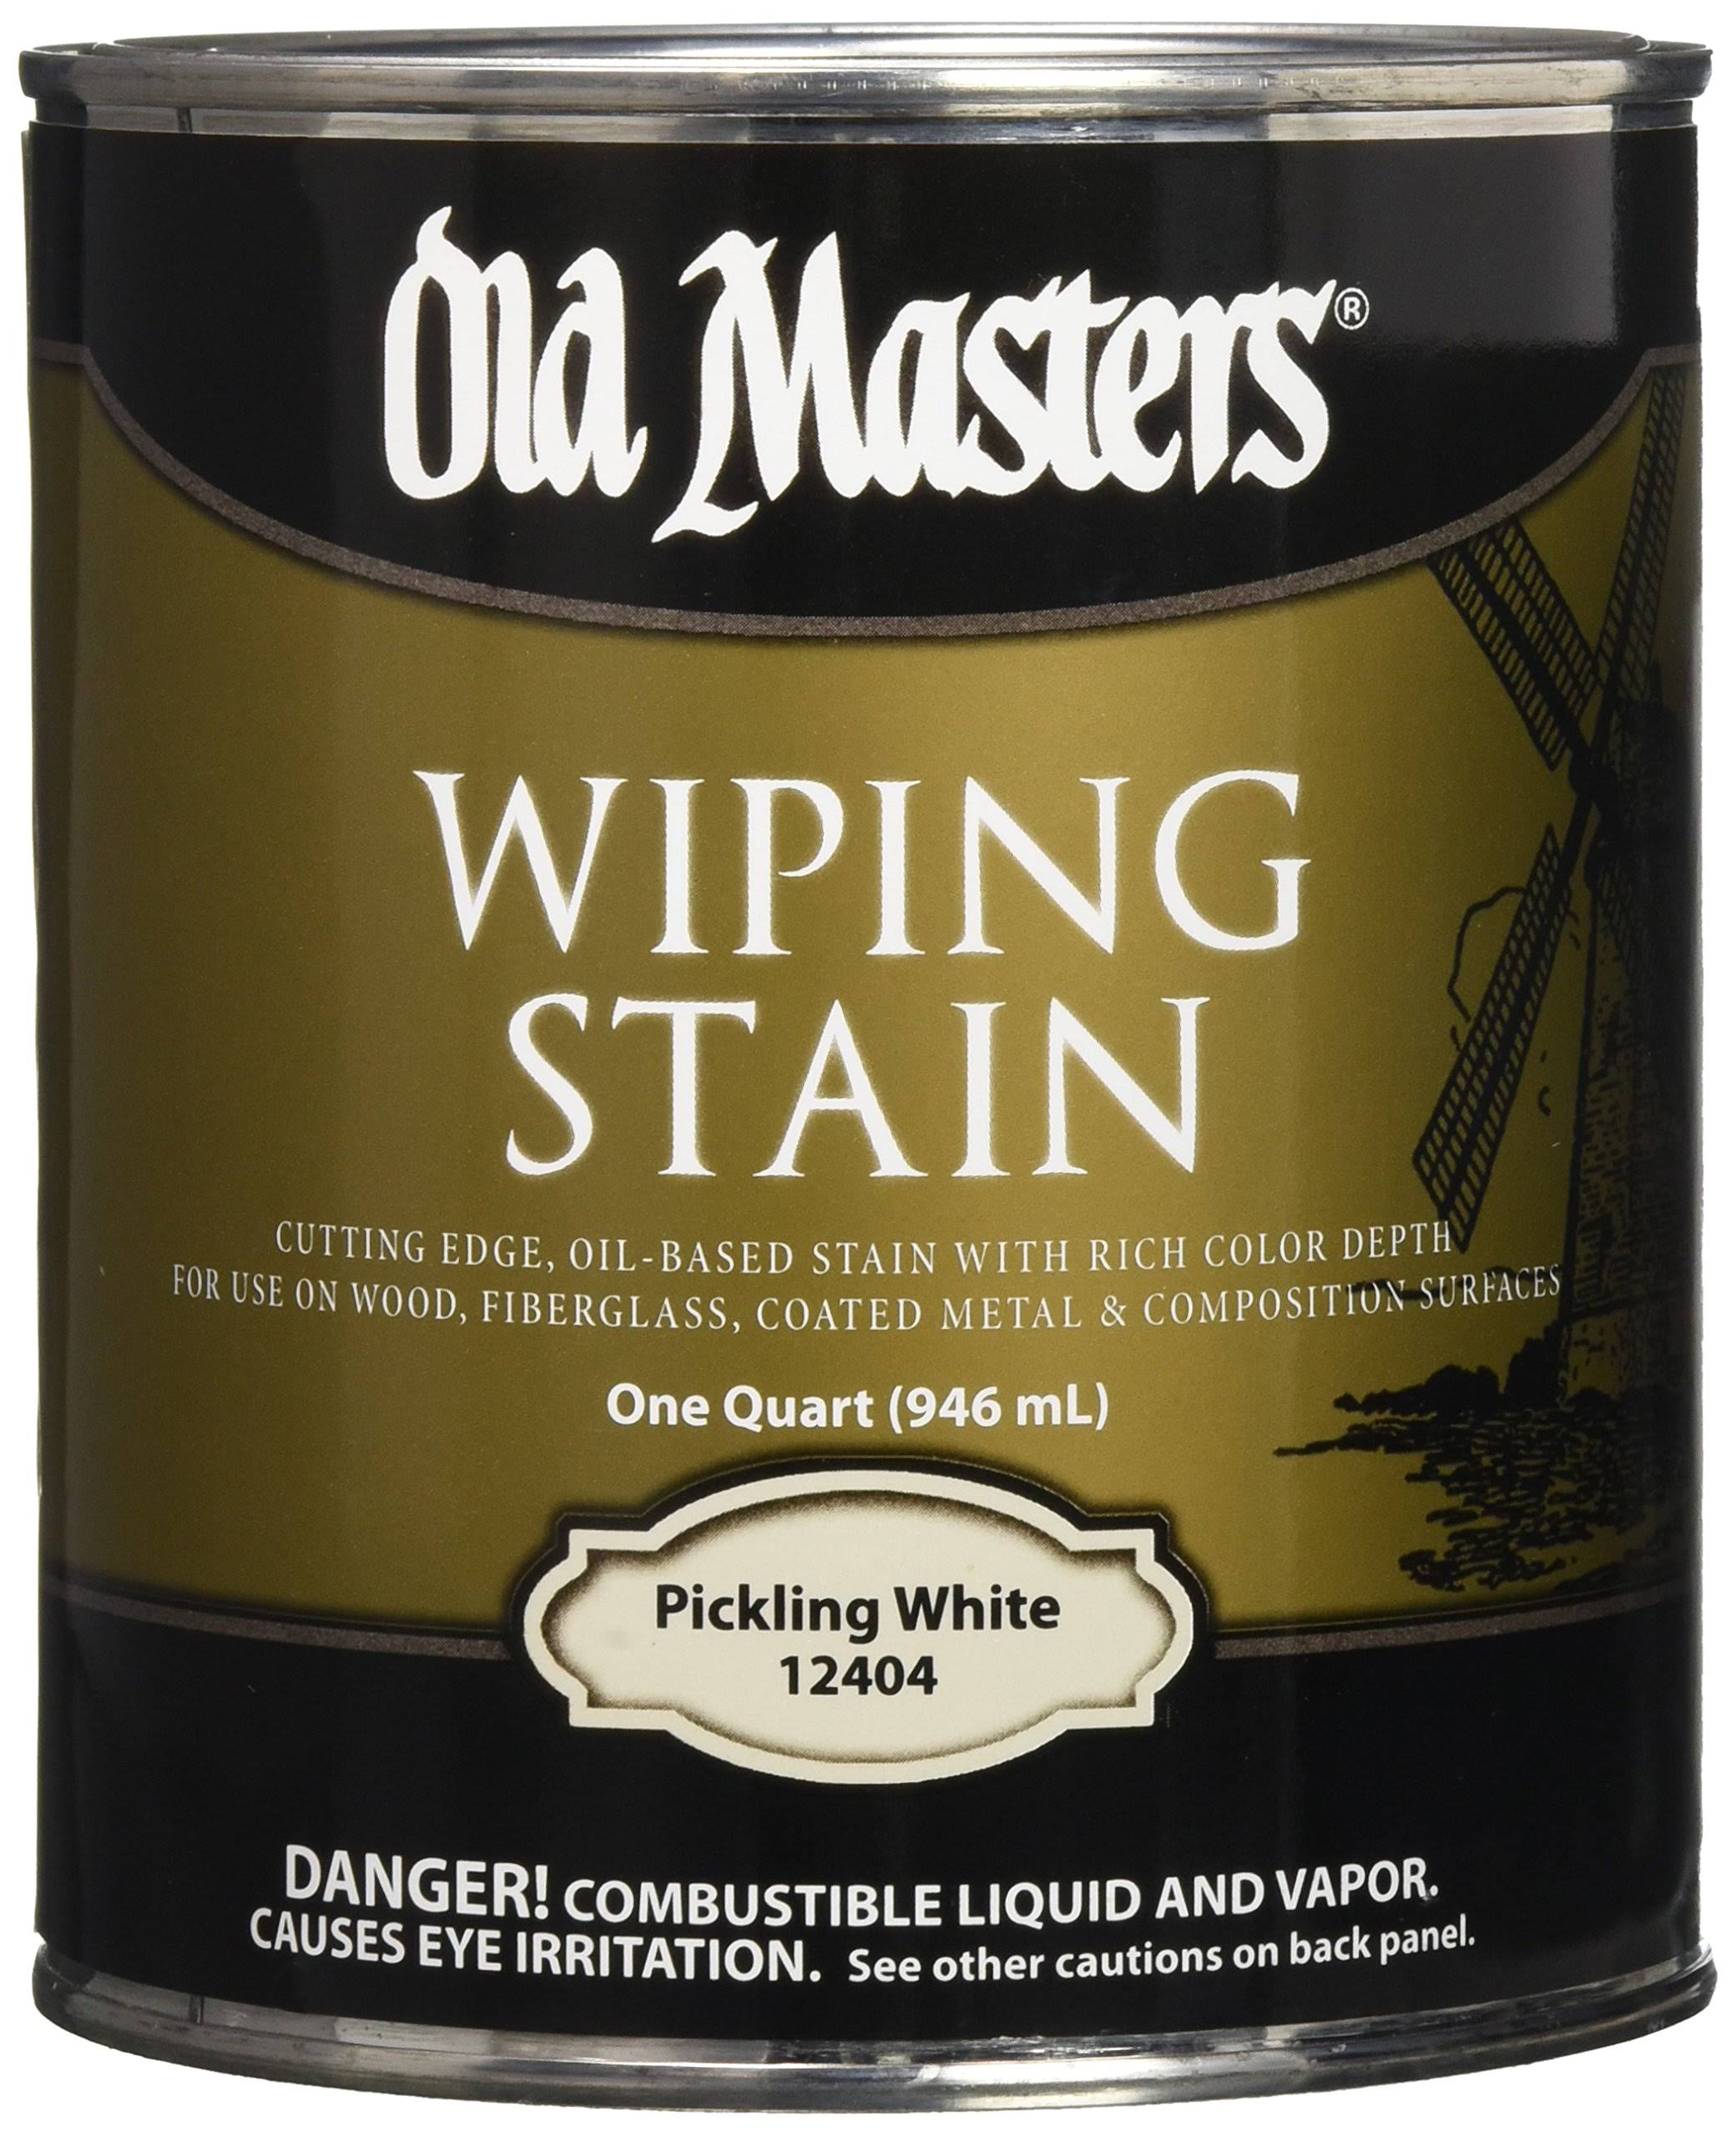 Old Masters Wiping Stain - Pickling White, 1 Quart